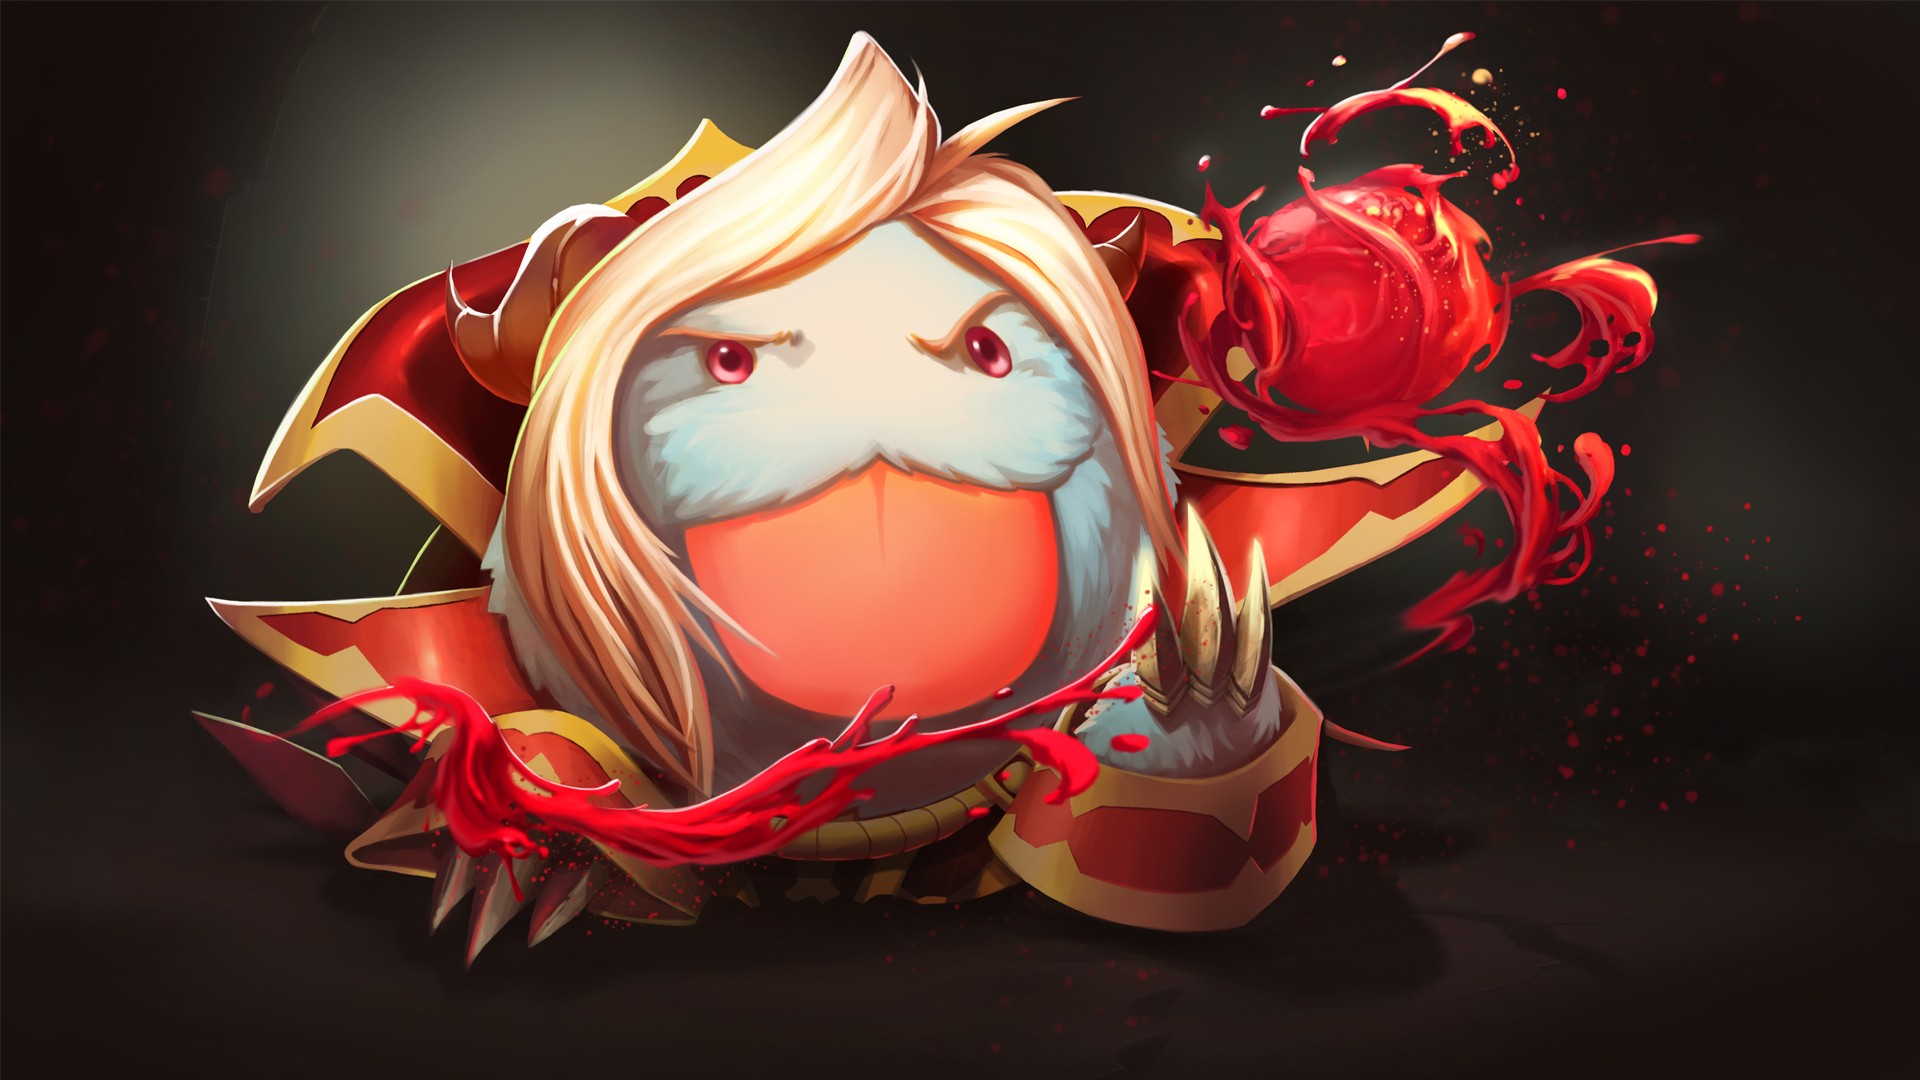 General 1920x1080 League of Legends video game art Vladimir (League of Legends) Poro (League of Legends) PC gaming video game characters